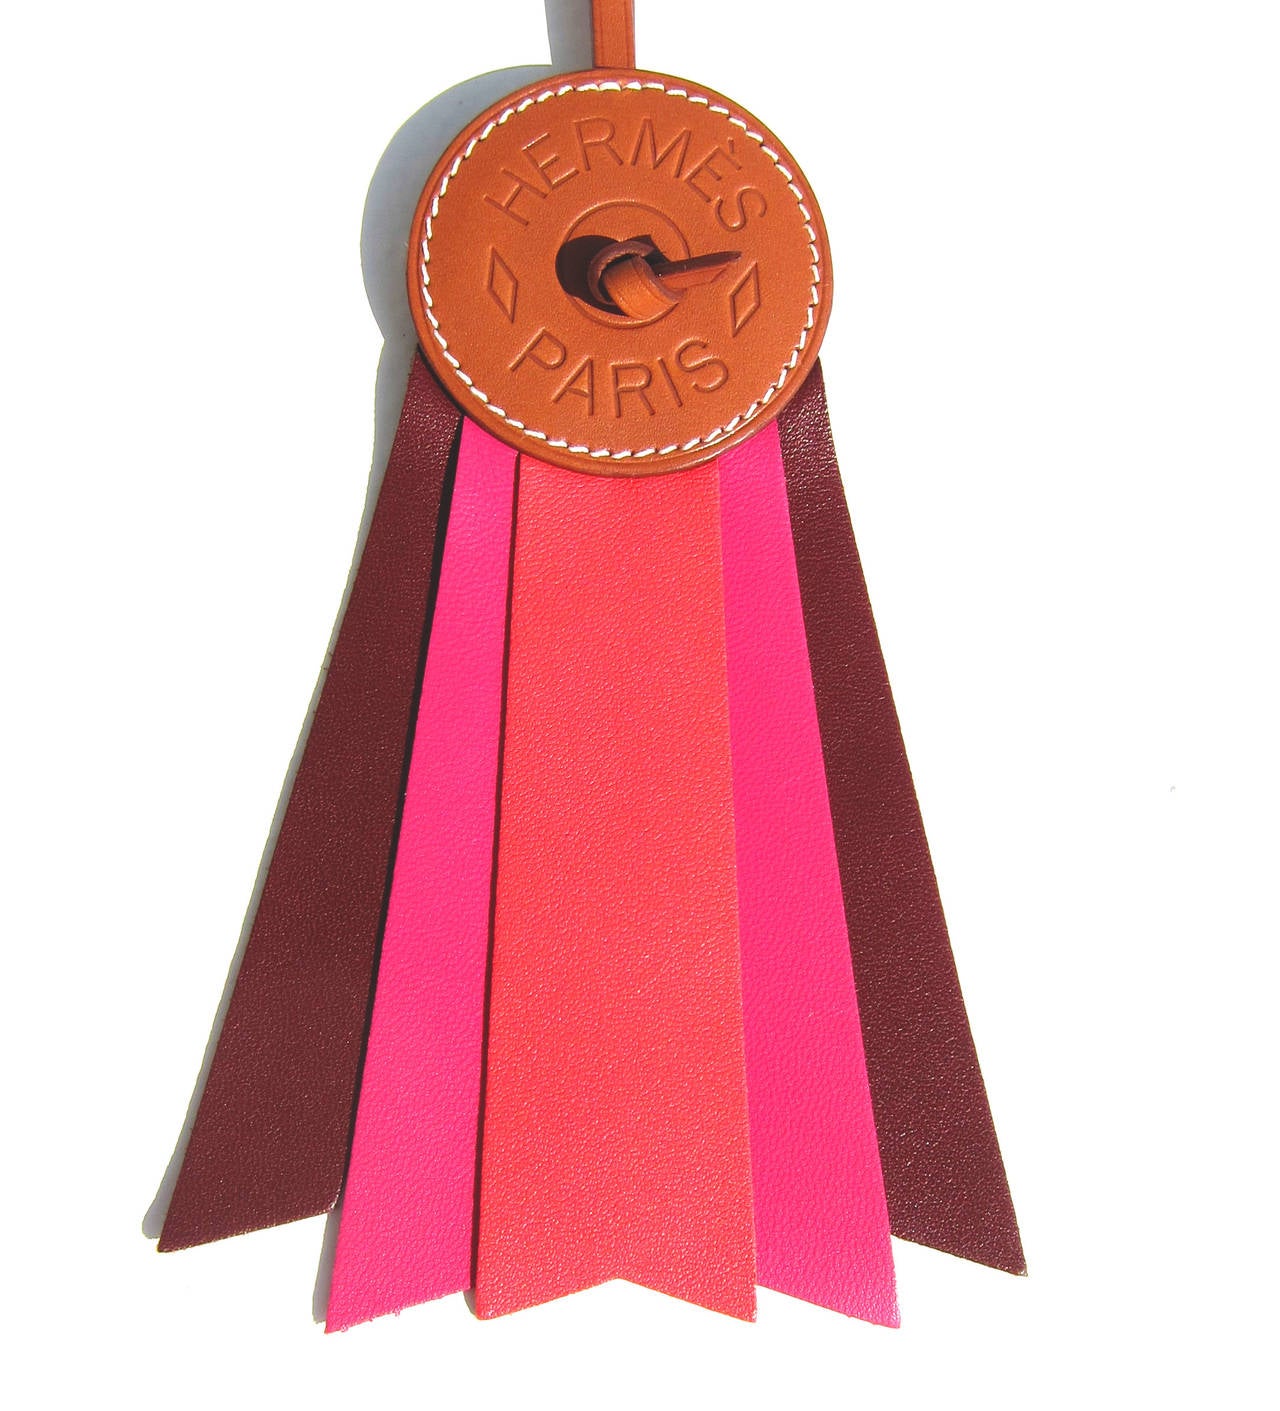 Hermes Rose Jaipur Rose Shocking Rouge H Paddock Flot Horse Ribbon Charm

Limited edition collector's item
Rose Jaipur / Rose Shocking / Rouge H Paddock Flot Leather Charm
Brand new in box coming with Hermes presentation gift box and